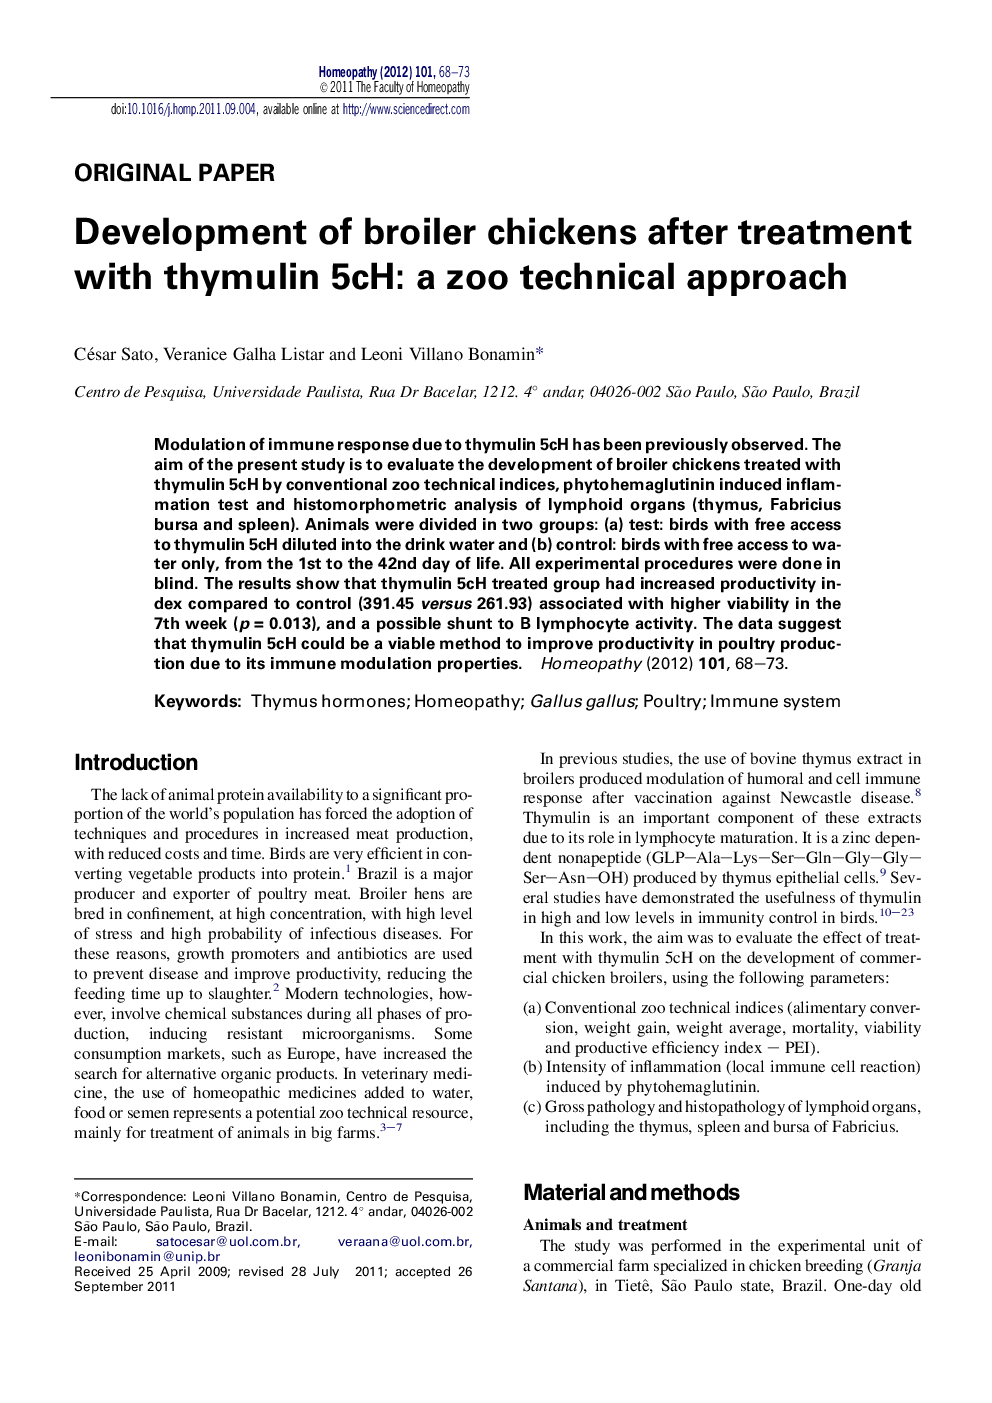 Development of broiler chickens after treatment with thymulin 5cH: a zoo technical approach